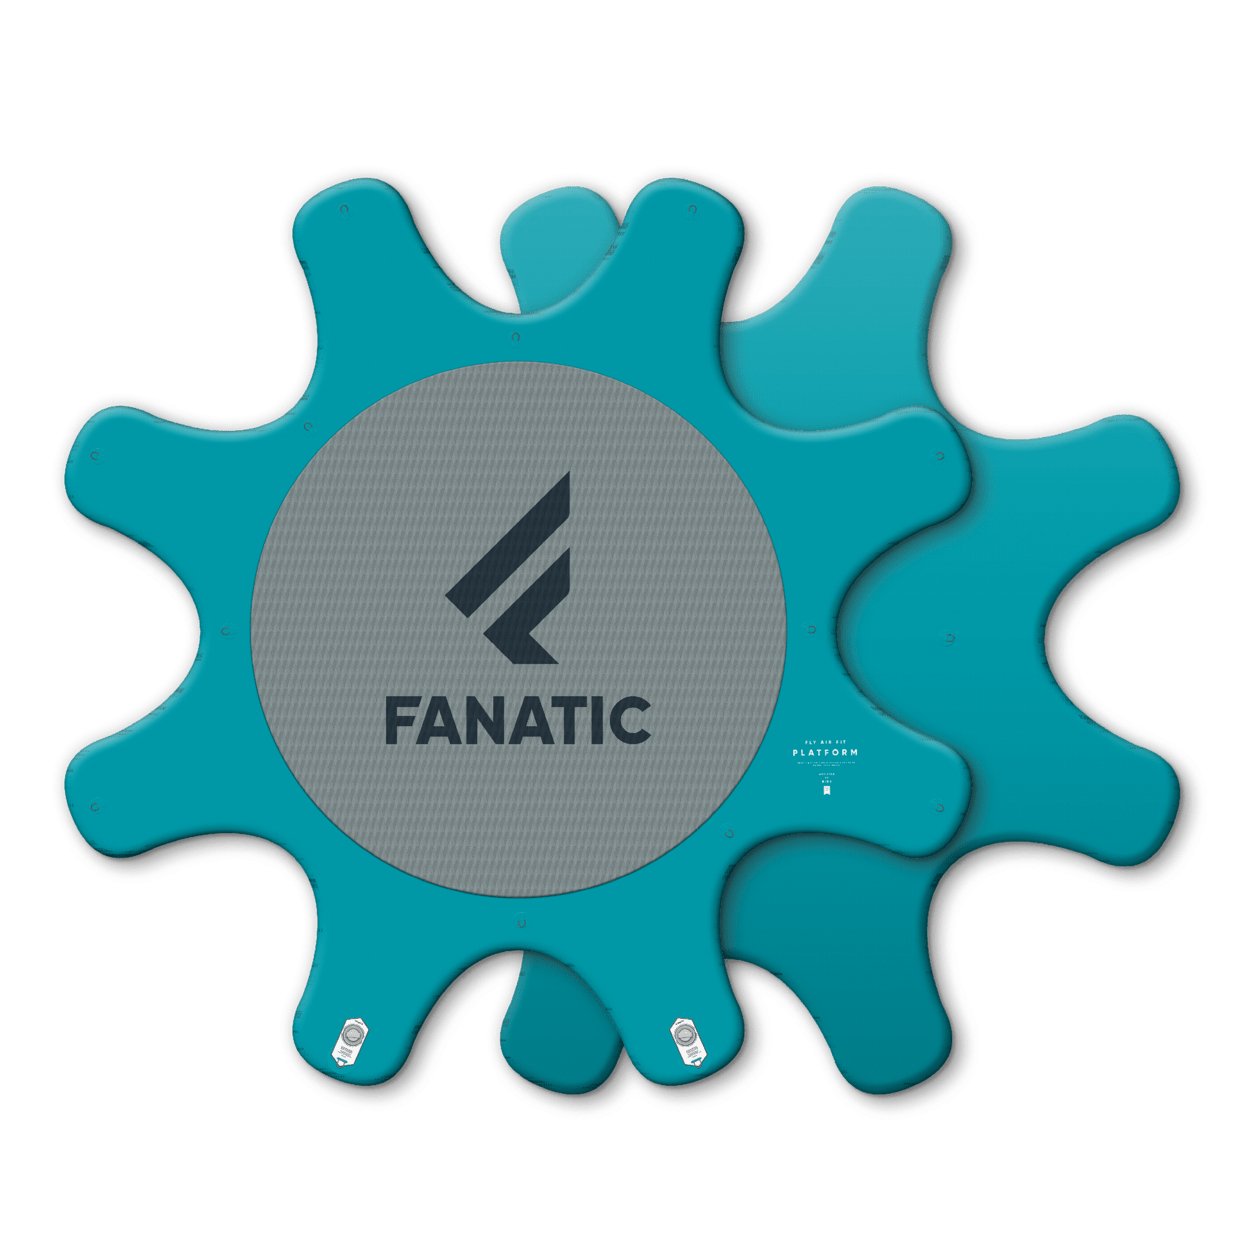 Fanatic Fly Air Fit Platform 2022 - Worthing Watersports - 9008415923045 - SUP Inflatables - Fanatic SUP